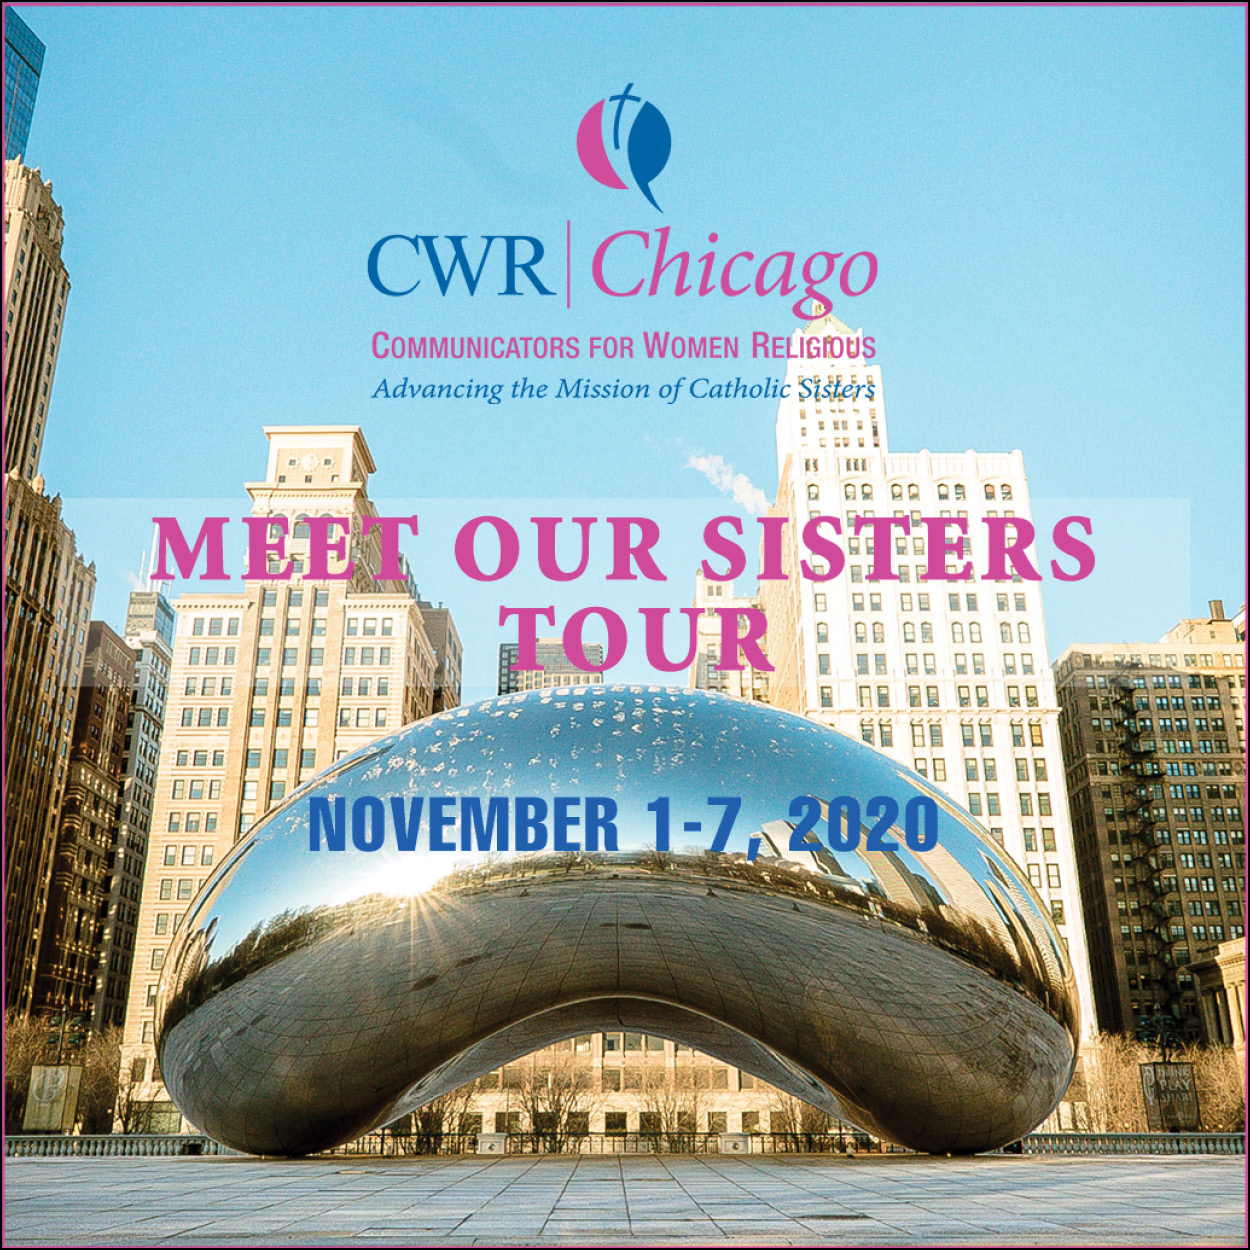 Meet Our Sisters Tour – You are invited!